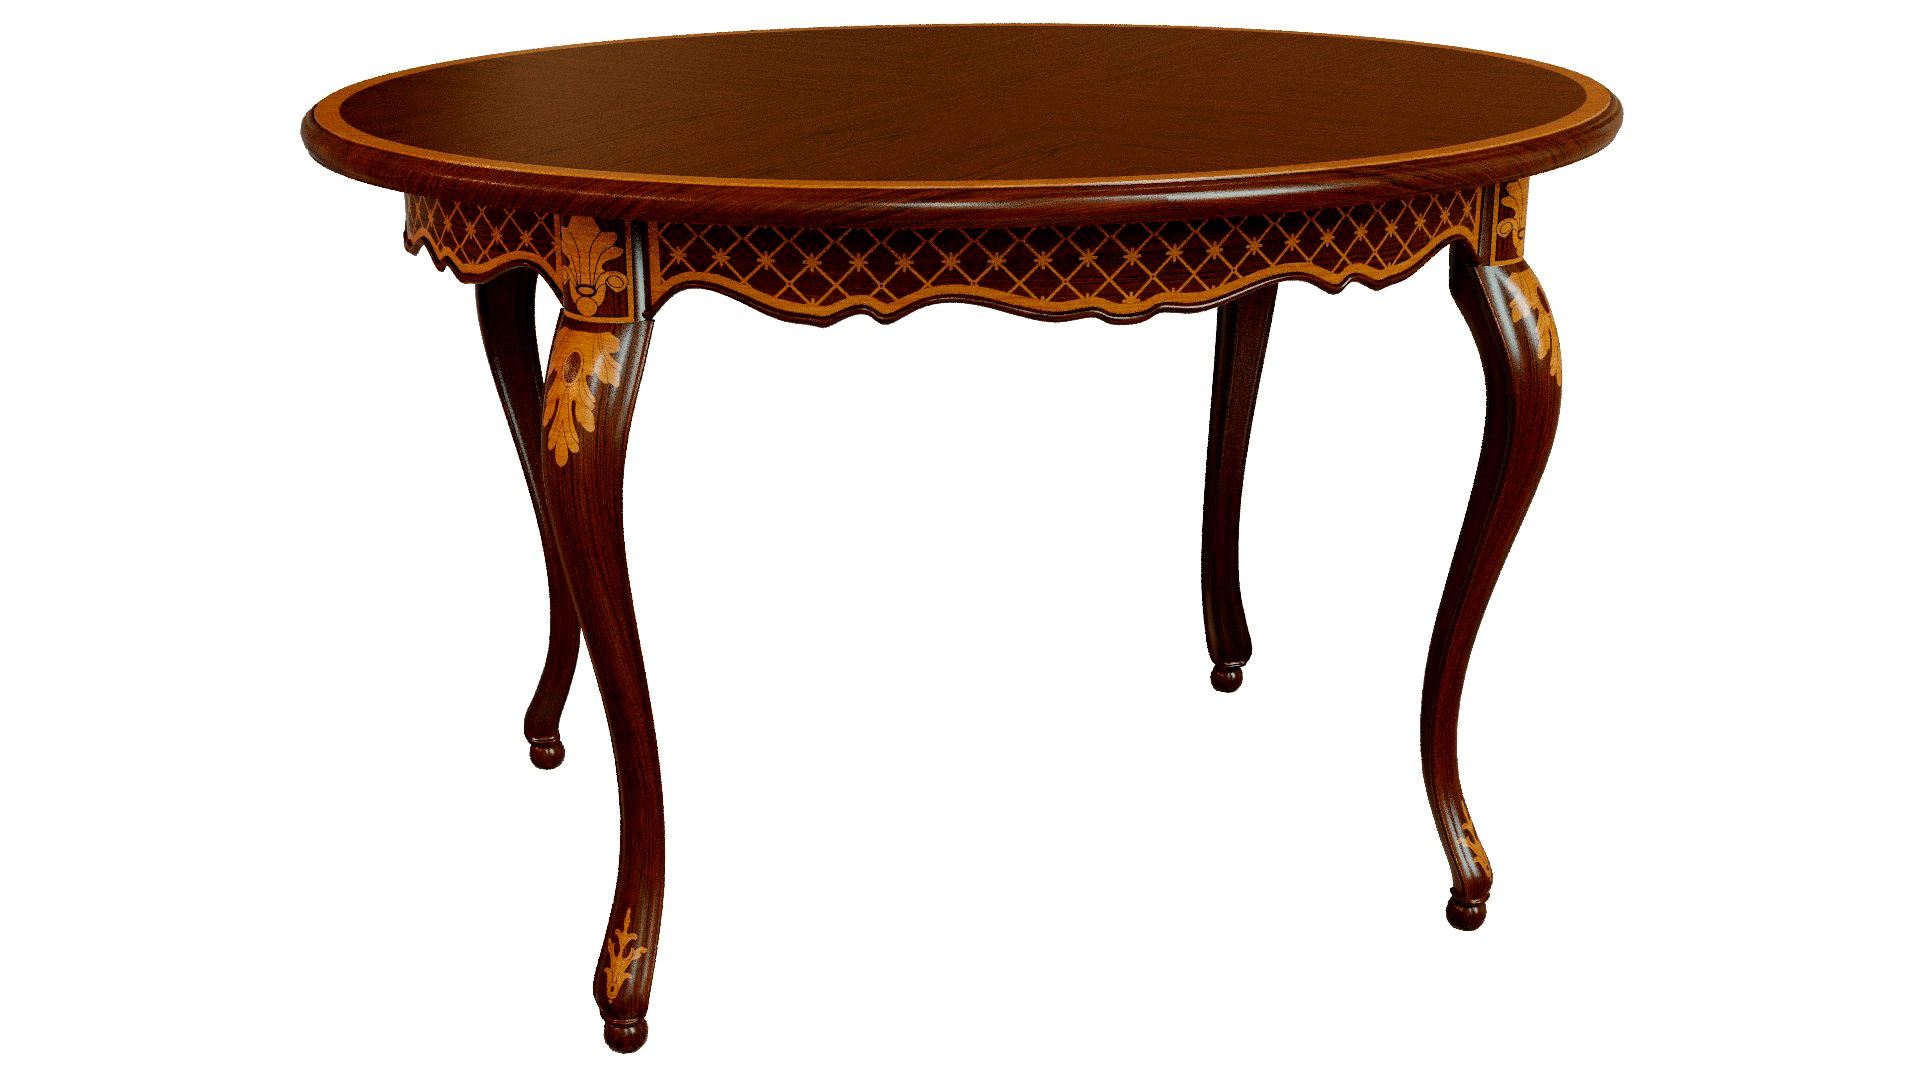 Classic table with inlaid veneer 1200